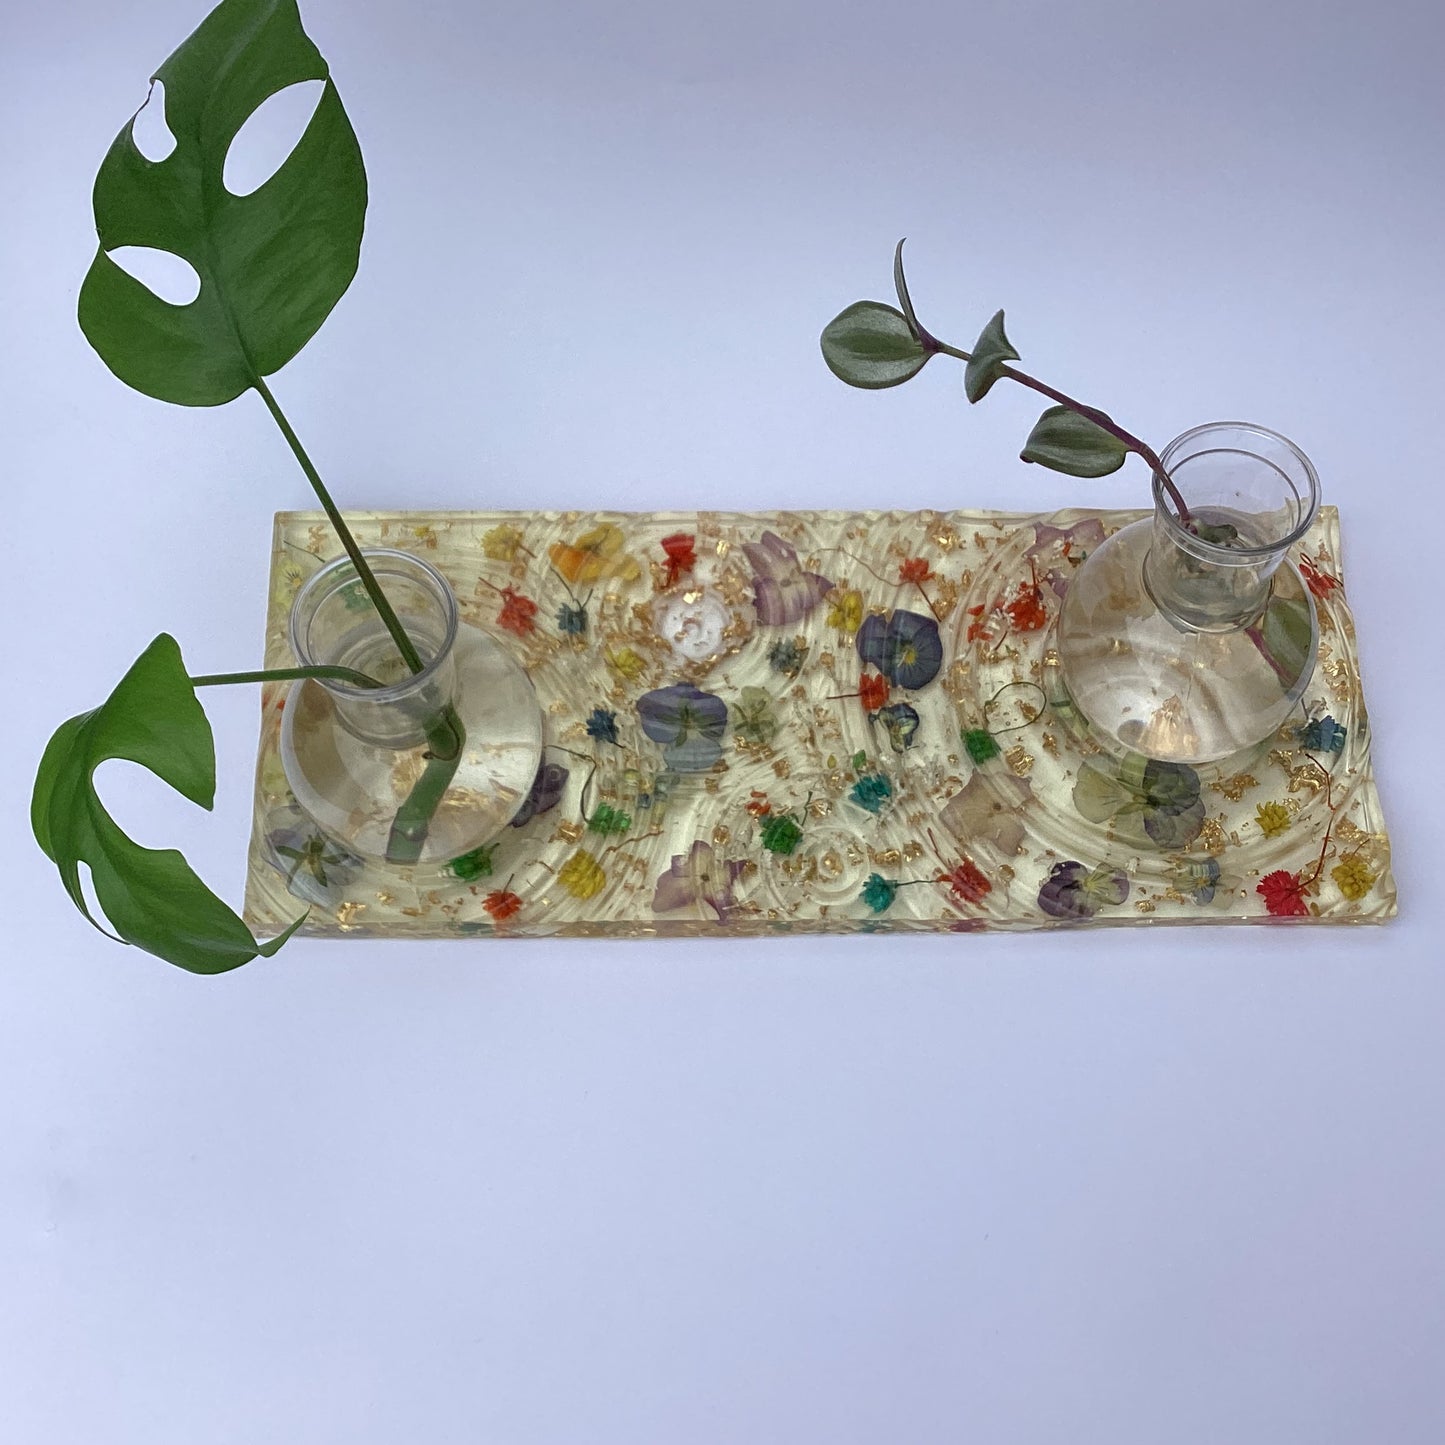 Propagation Station made with real dried flowers or crystals